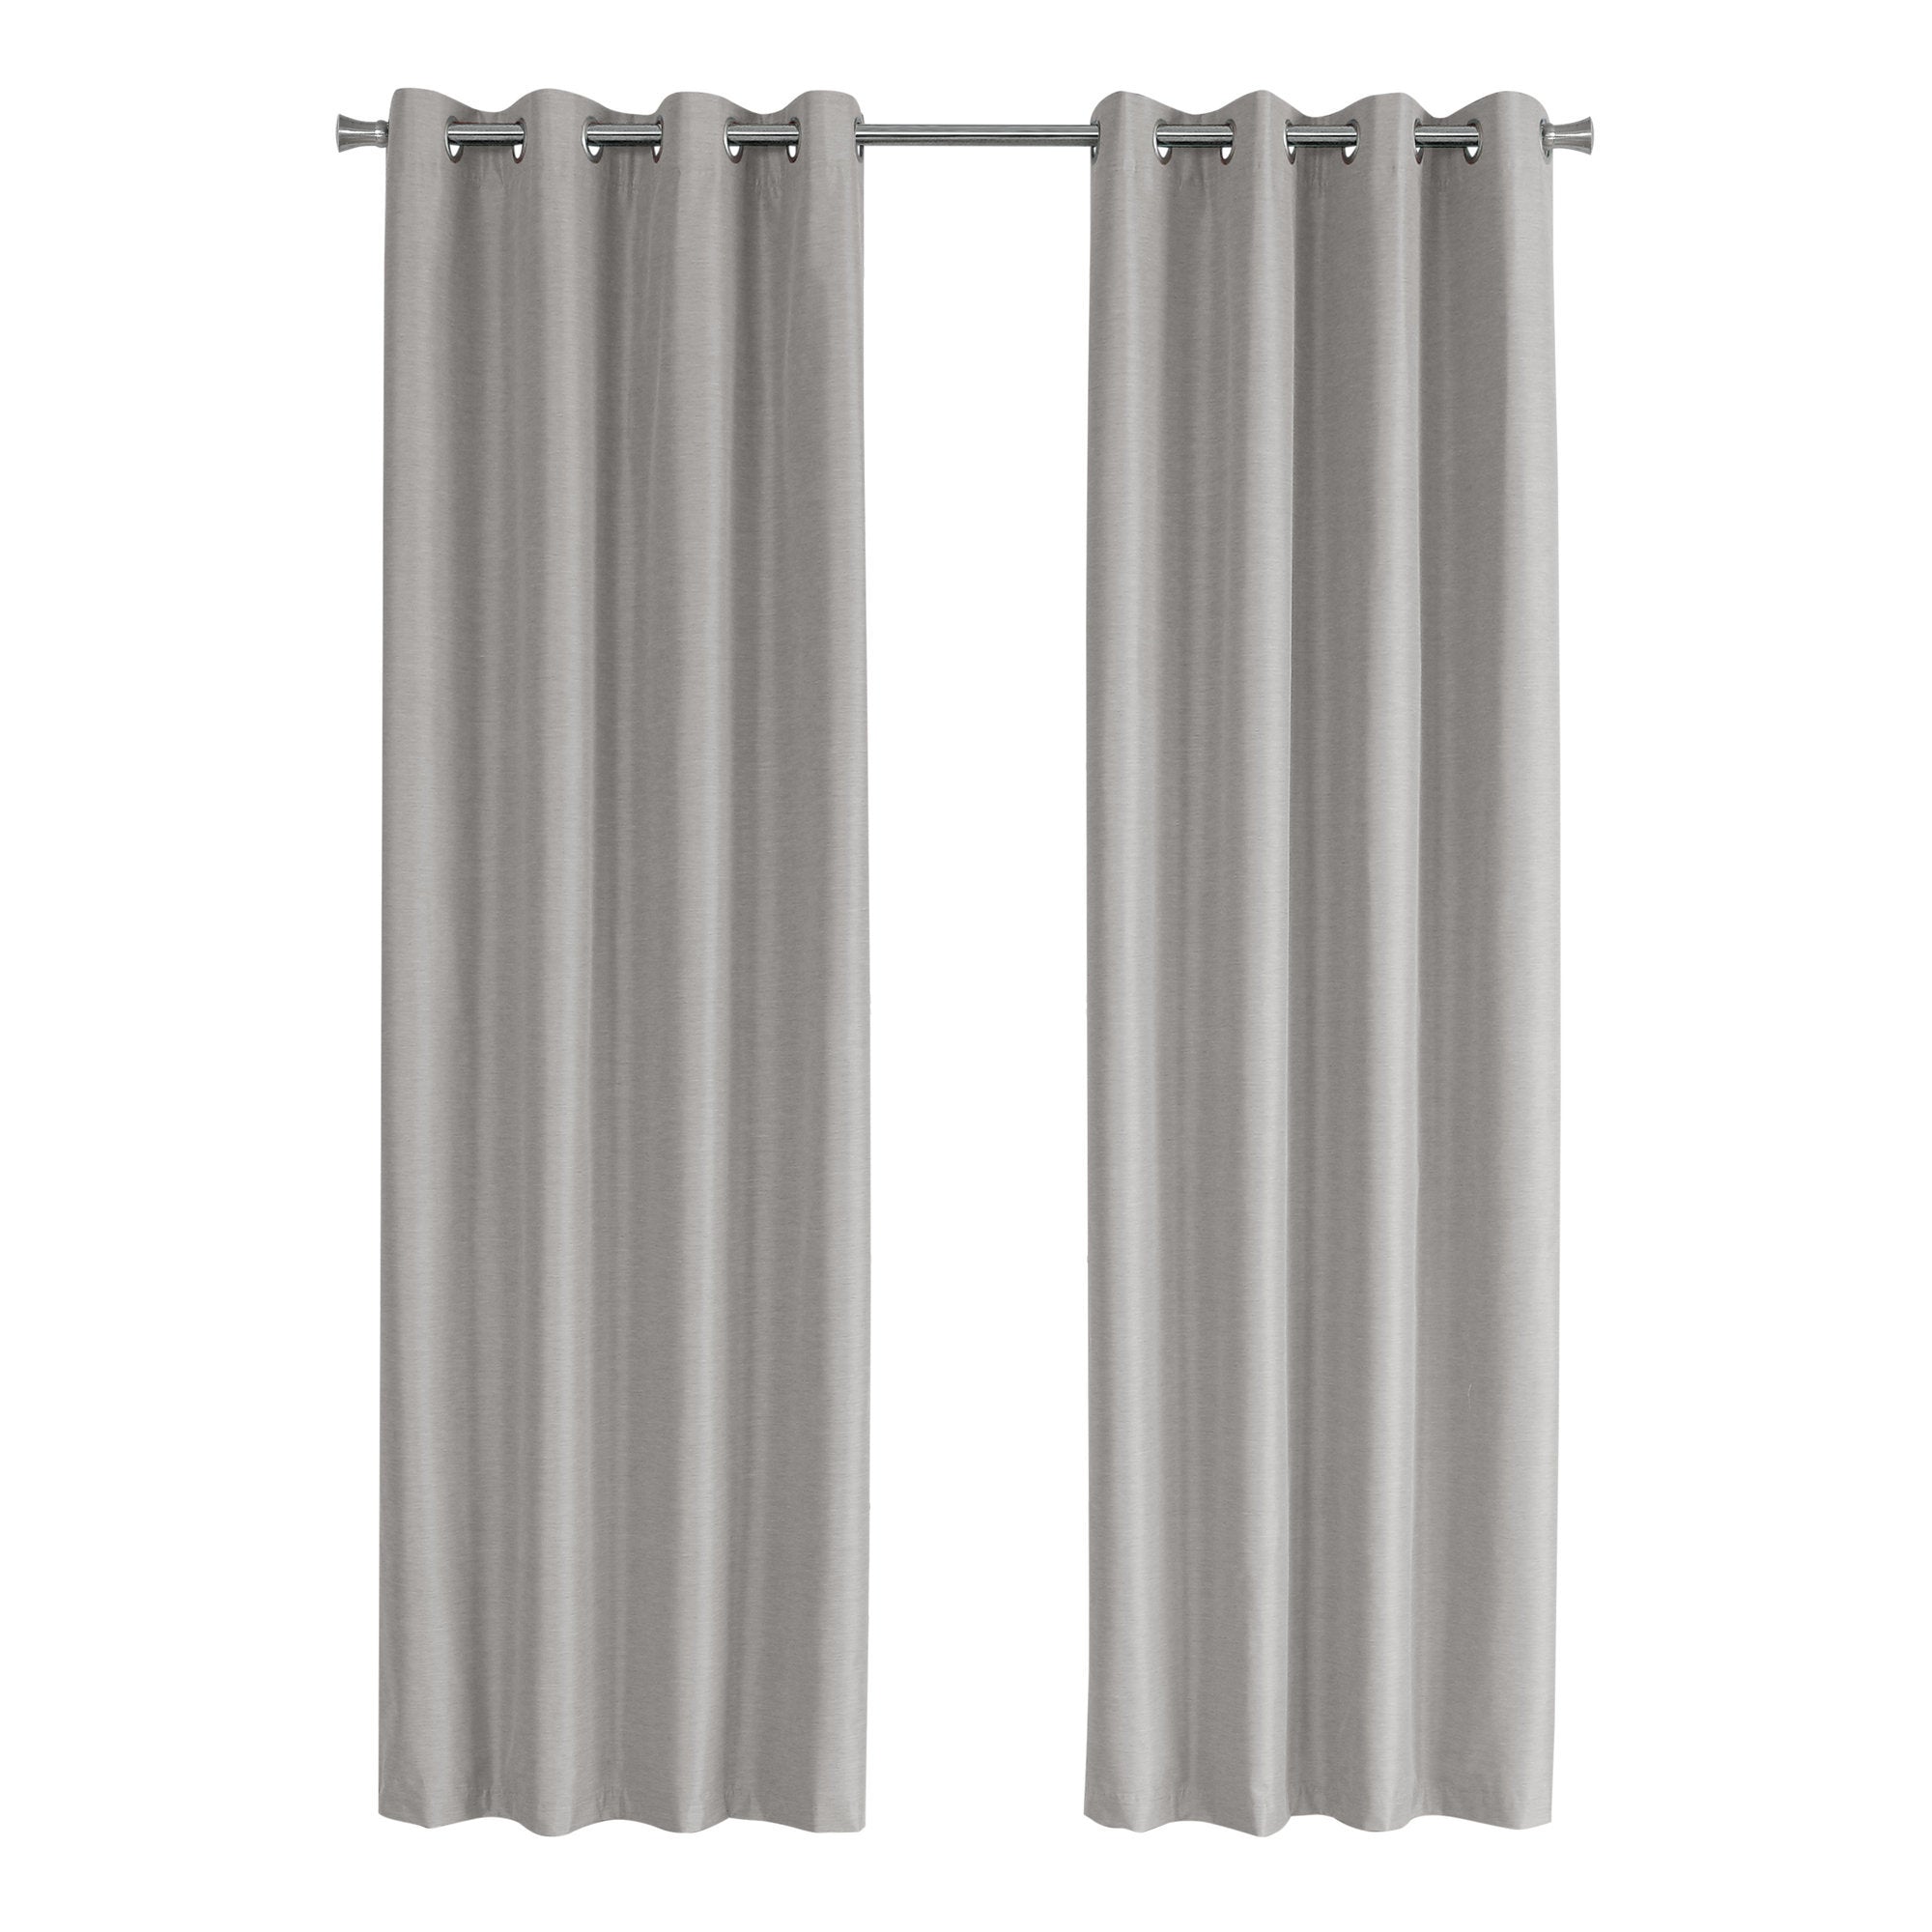 Curtain Panel - 2Pcs / 52W X 95H Silver Solid Blackout